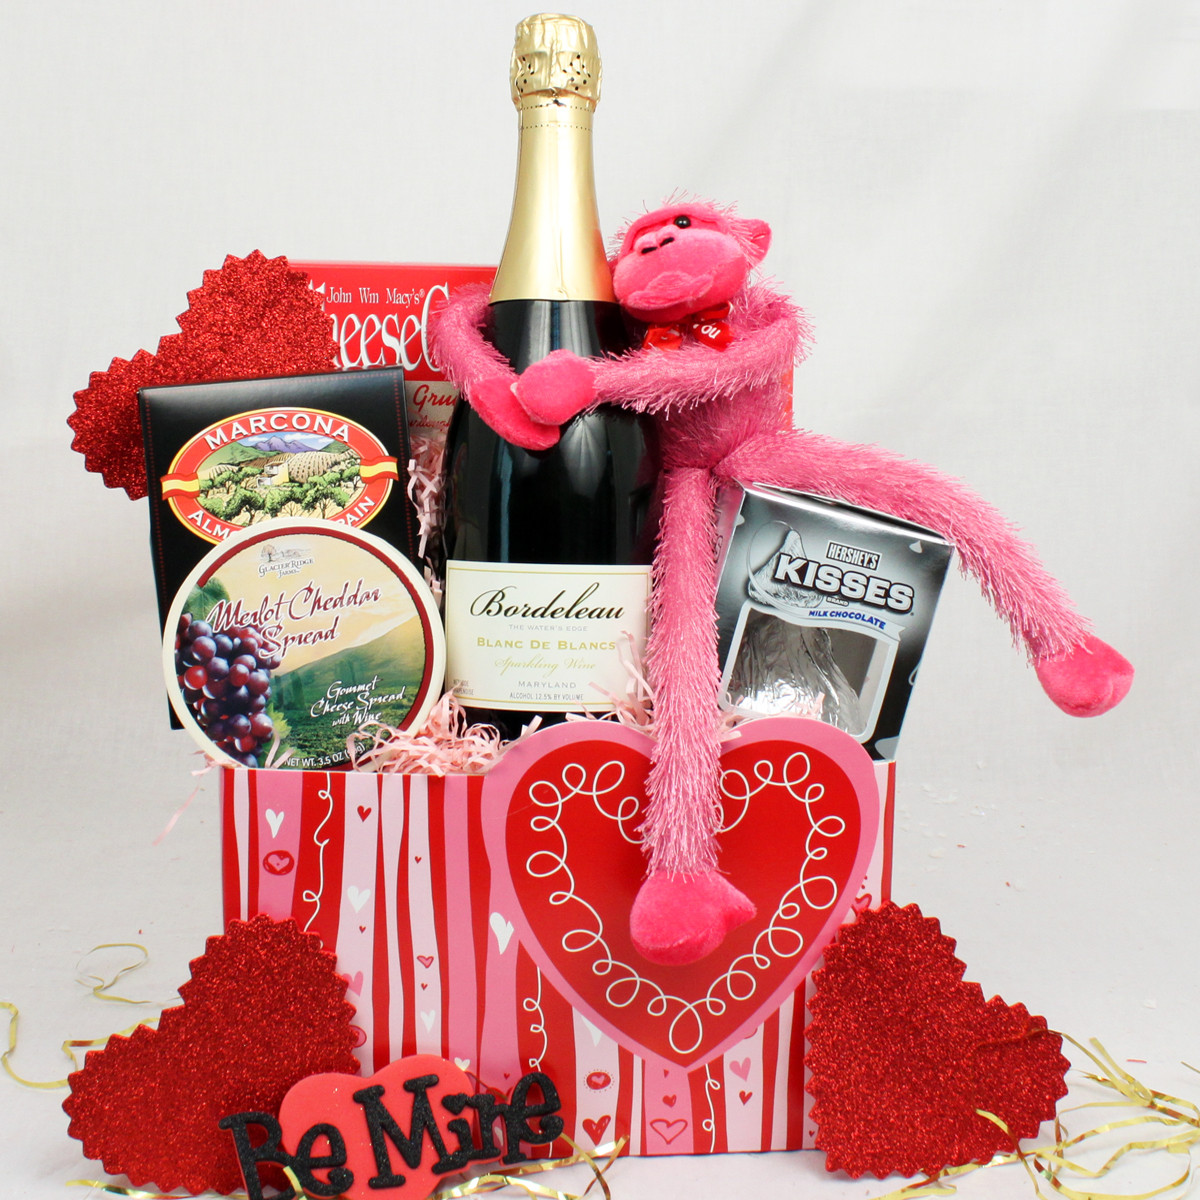 Creative Valentines Day Ideas For Her
 Creative and Thoughtful Valentine’s Day Gifts for Her